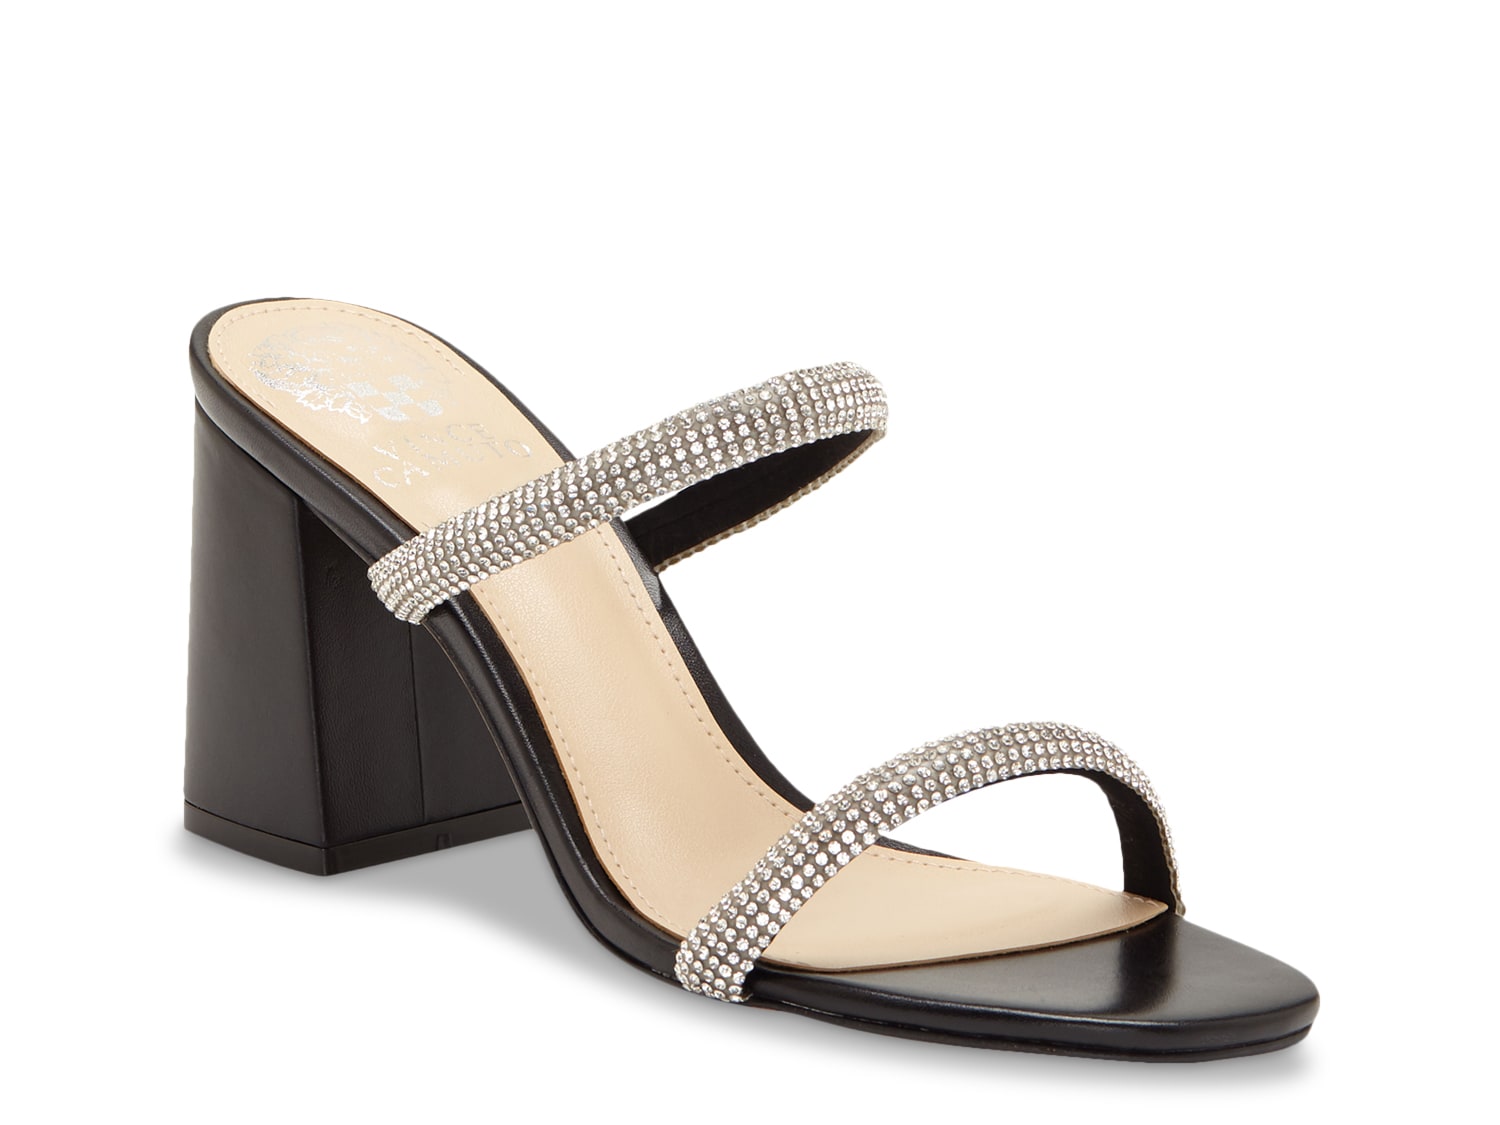 Vince Camuto Magaly Sandal - Free Shipping | DSW